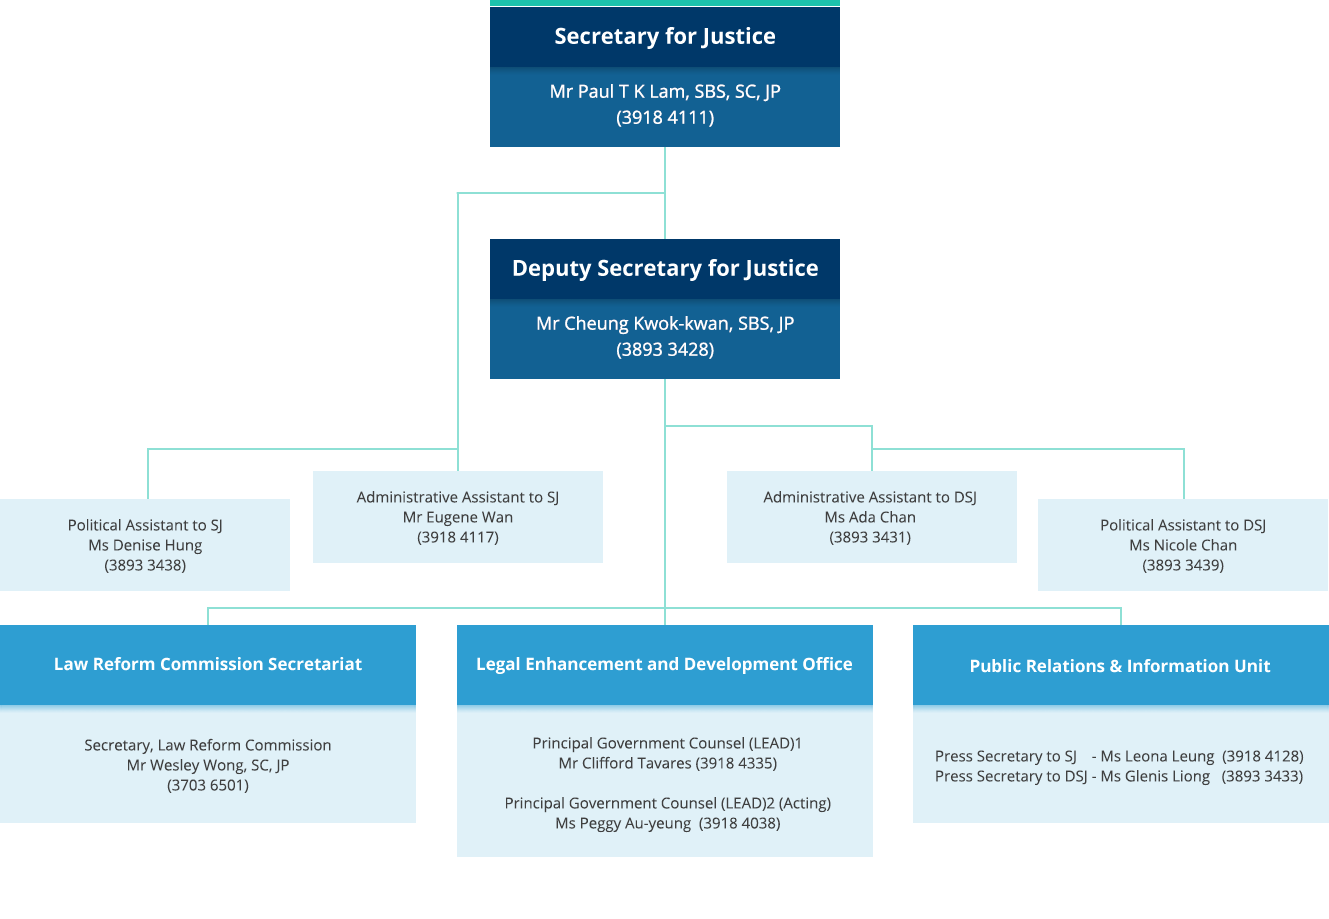 Organisation chart of the Secretary for Justice's Office. Secretary for Justice, Ms Teresa Cheng, GBM, GBS, SC, JP (3918 4111). Law Reform Commission Secretariat, Secretary, Law Reform Commission, Mr Wesley Wong, SC, JP (3918 4001).Inclusive Dispute Avoidance and Resolution Office, Commissioner, Dr James Ding (3918 4788). Rule of Law Unit. Administrative Assistant to SJ, Ms Christie Kwong (3918 4117).Press Secretary to SJ, Mr Mackenzie Mak (3918 4128). Public Relations & Information Unit.